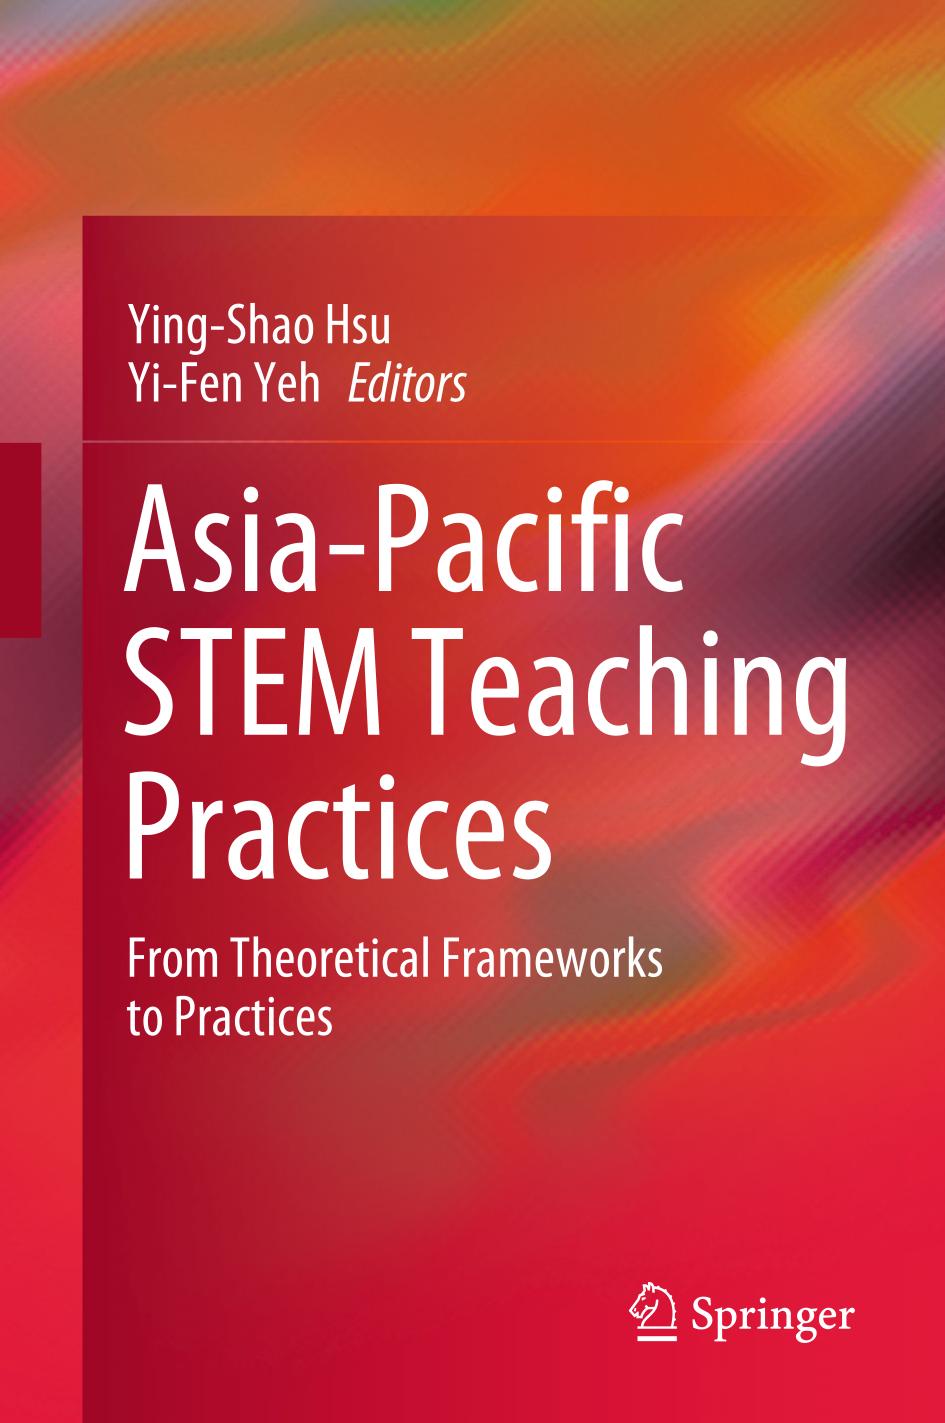 Asia-Pacific STEM Teaching Practices : From Theoretical Frameworks to Practices.